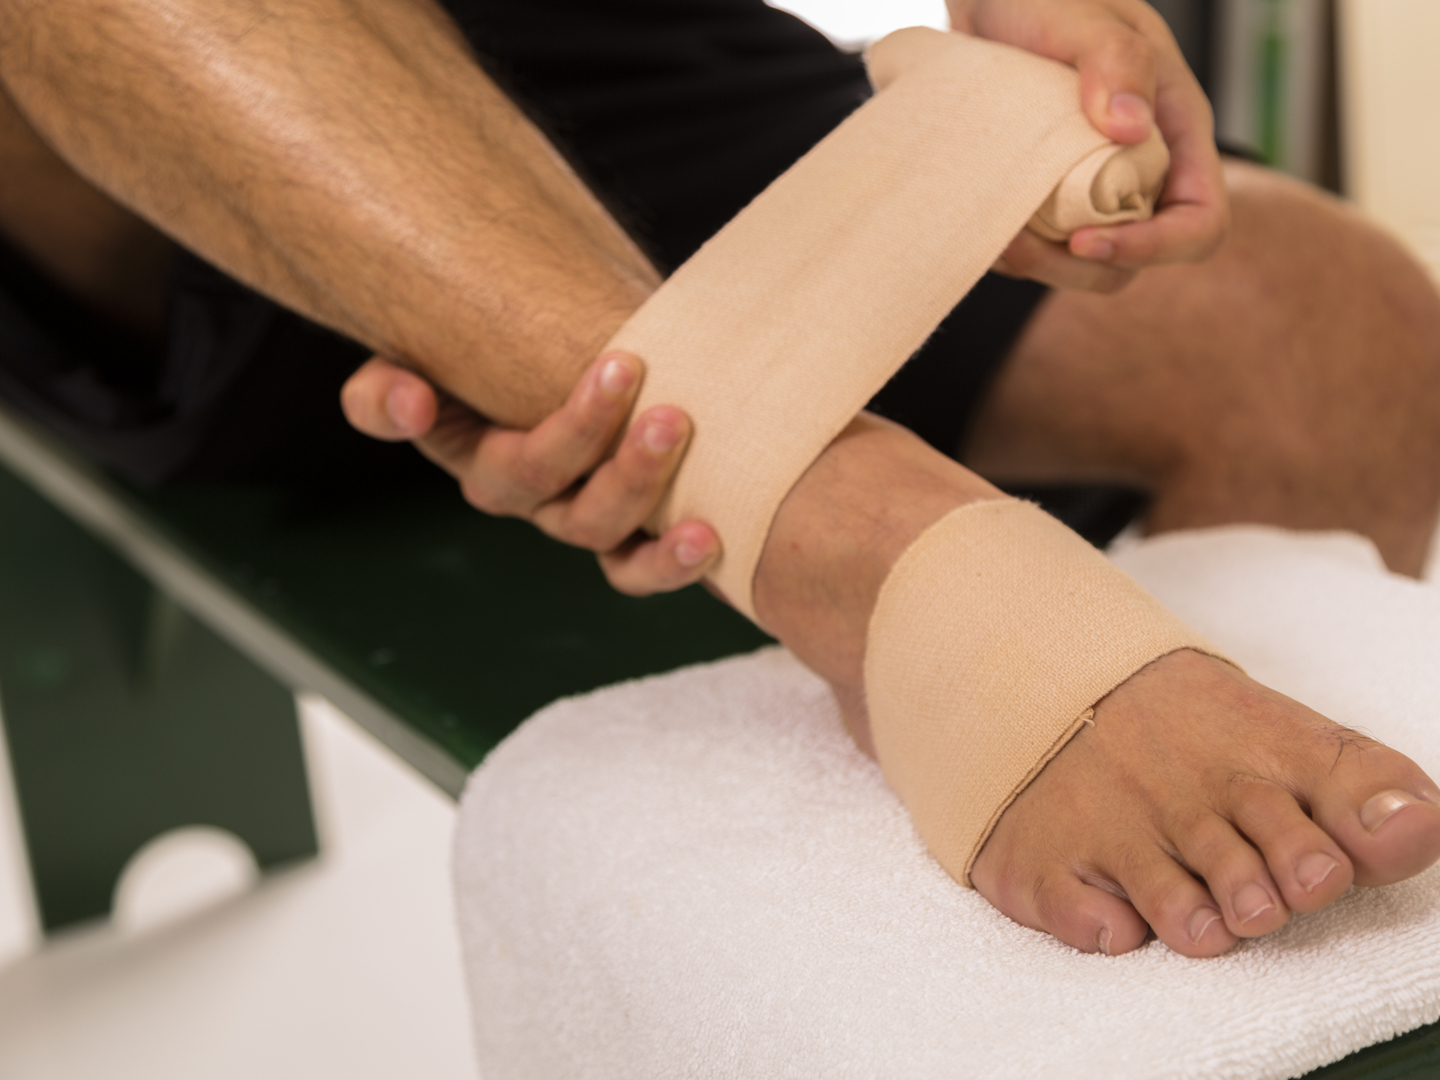 Man in sports locker room wrapping his painful ankle.